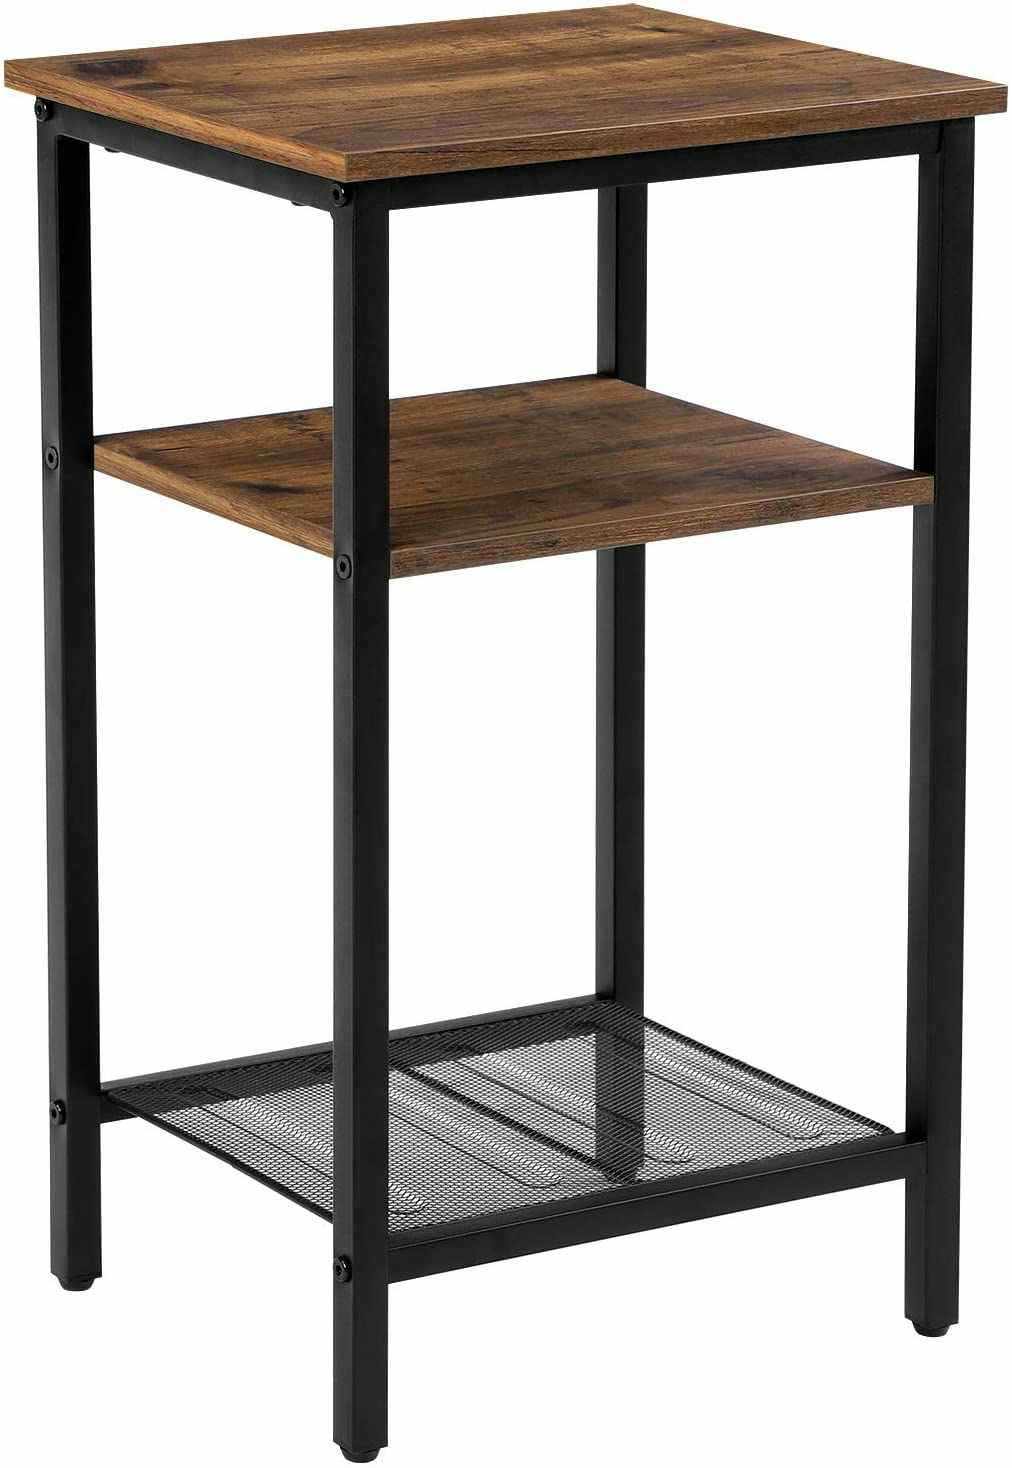 A three-tier end table.